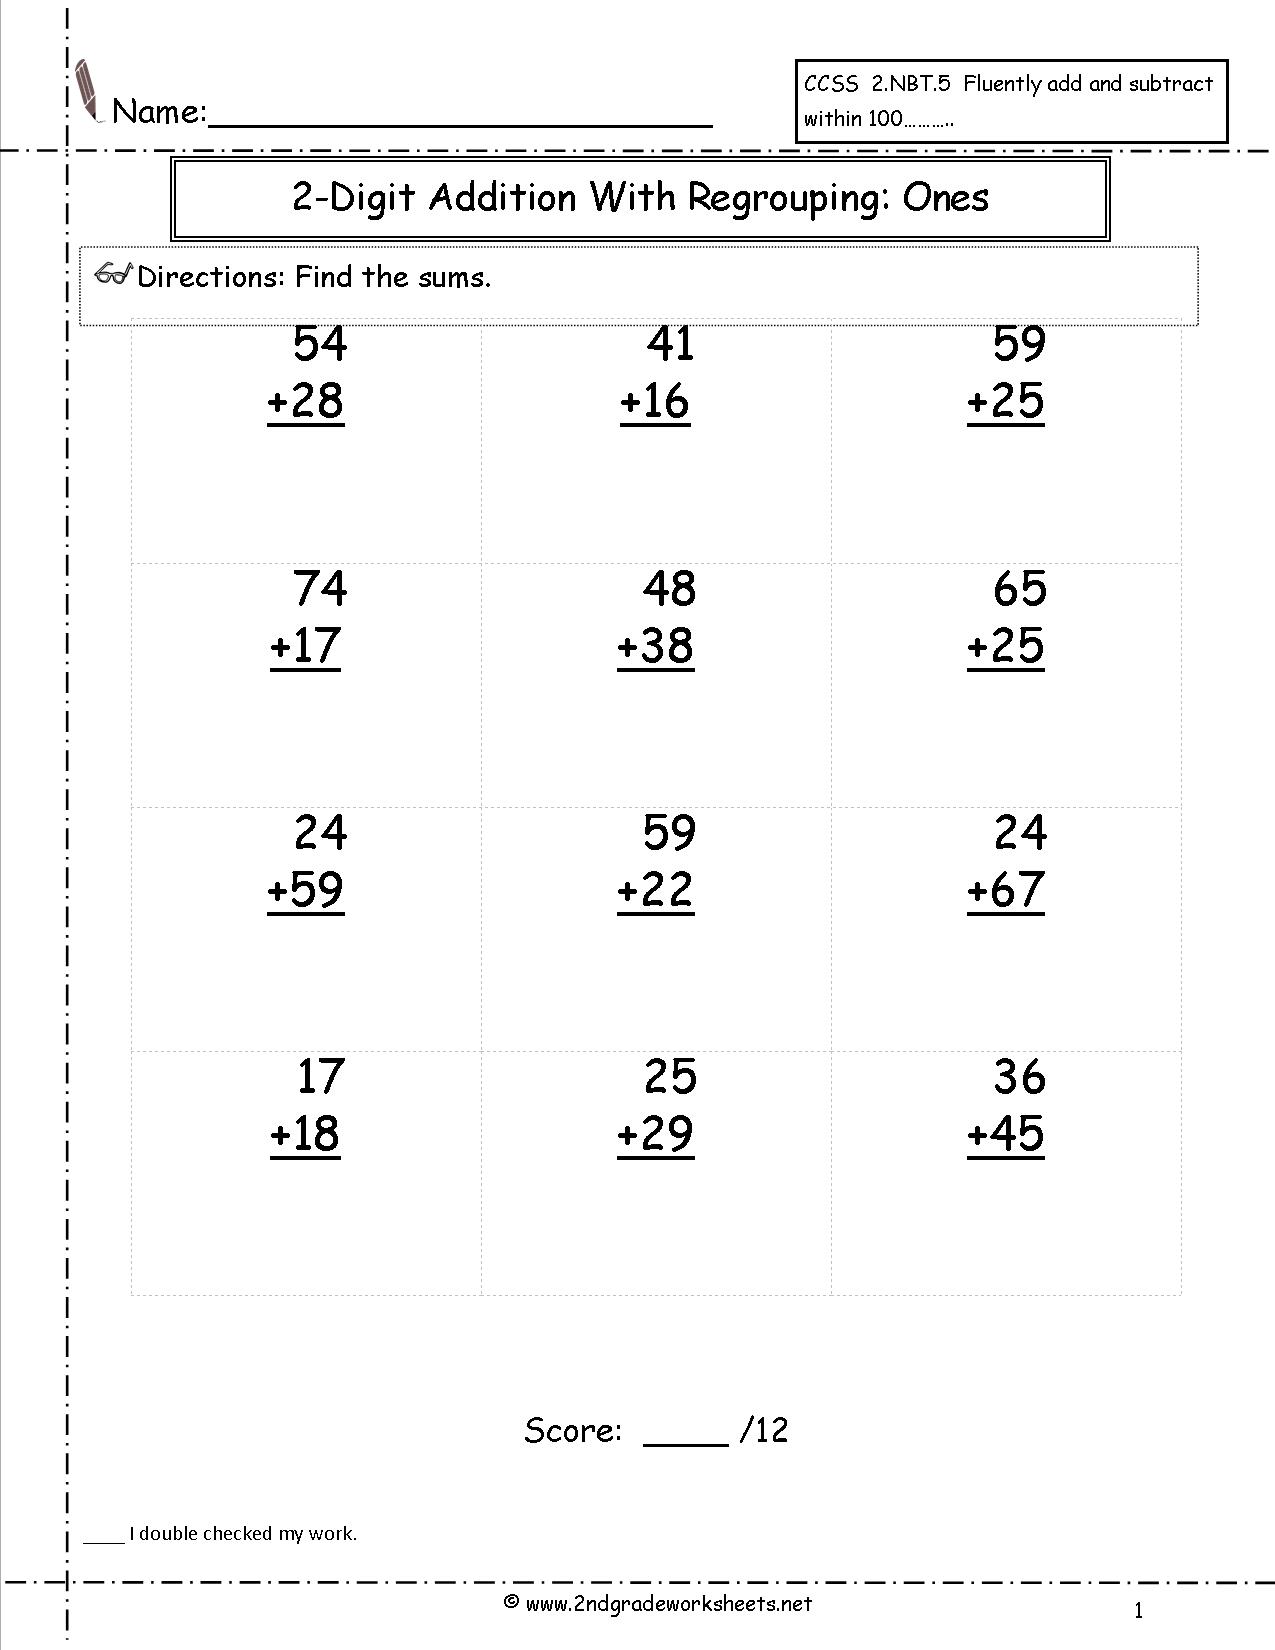 2 Digit Addition With Regrouping Pdf 2 Digit Addition With No Regrouping LP Checking With